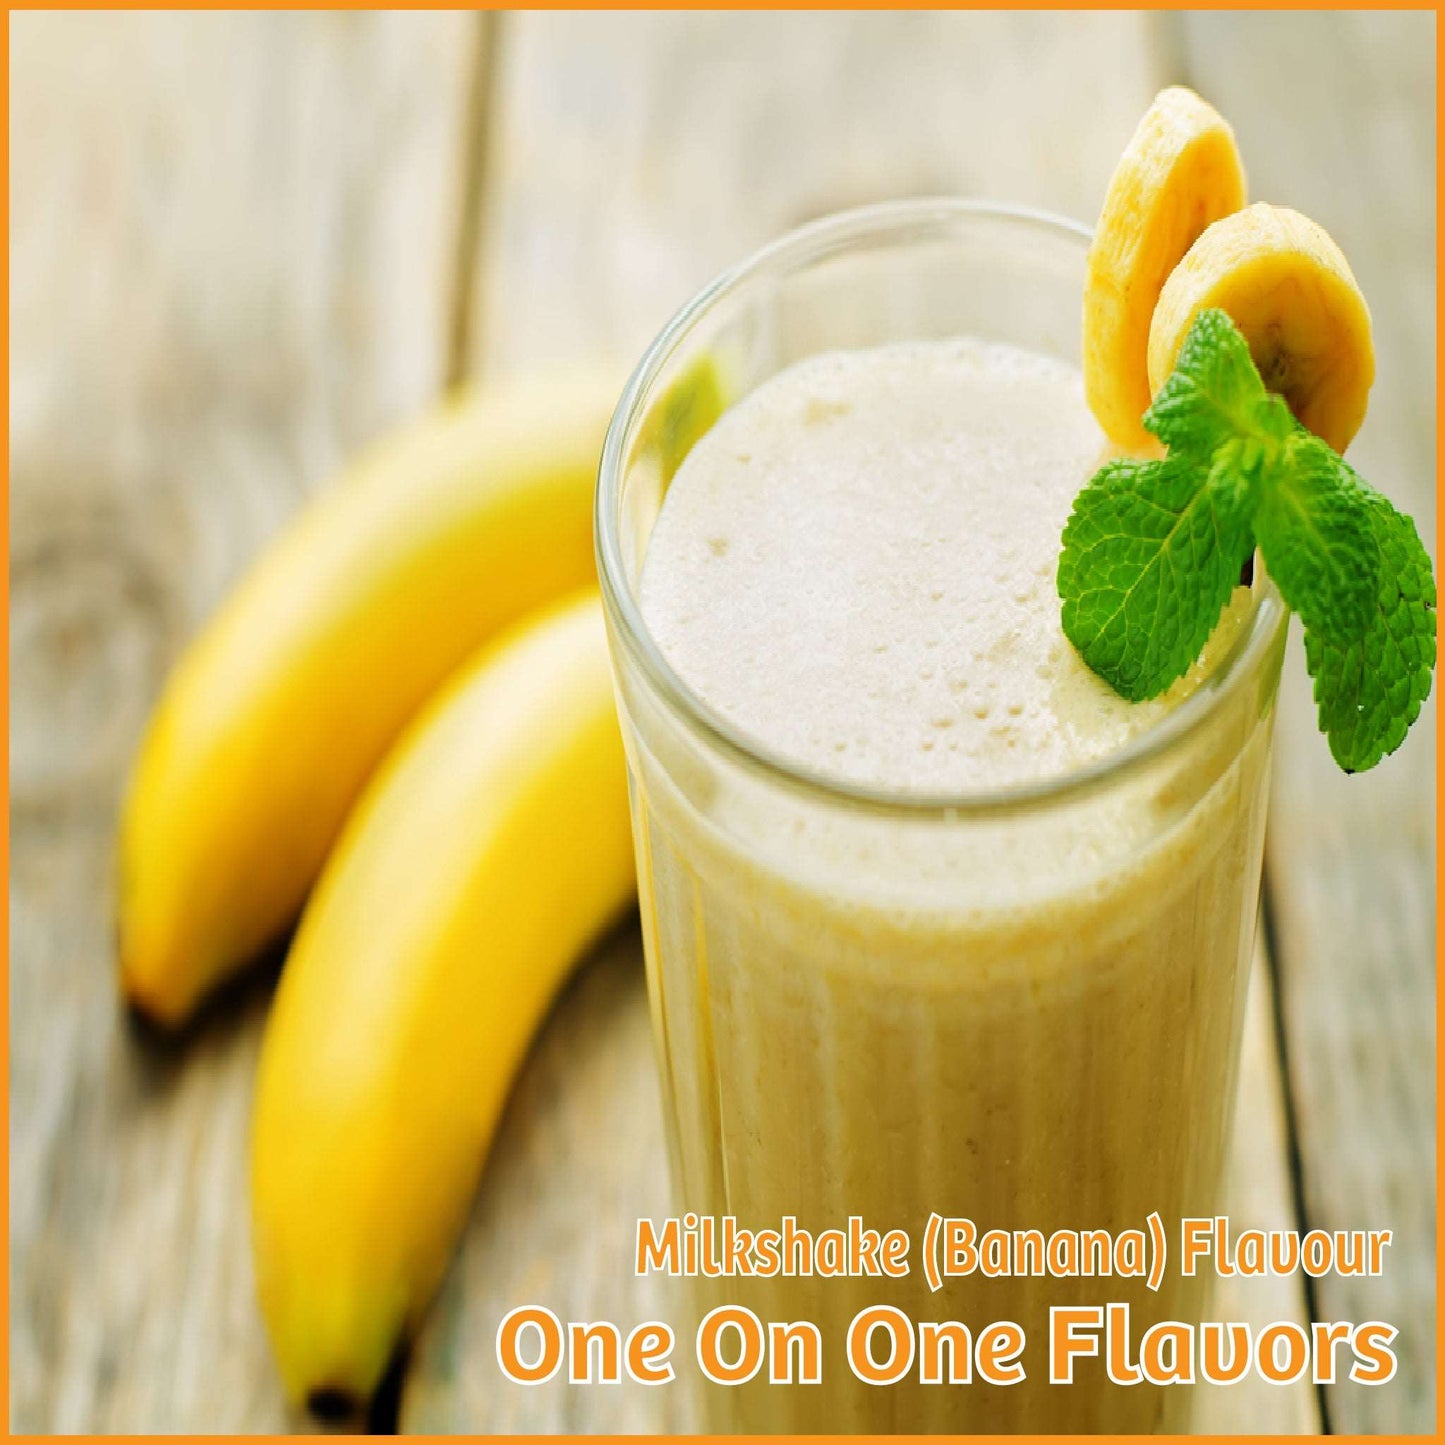 Milkshake (Banana) Flavour- One On One Flavors - Flavour Fog - Canada's flavour depot.